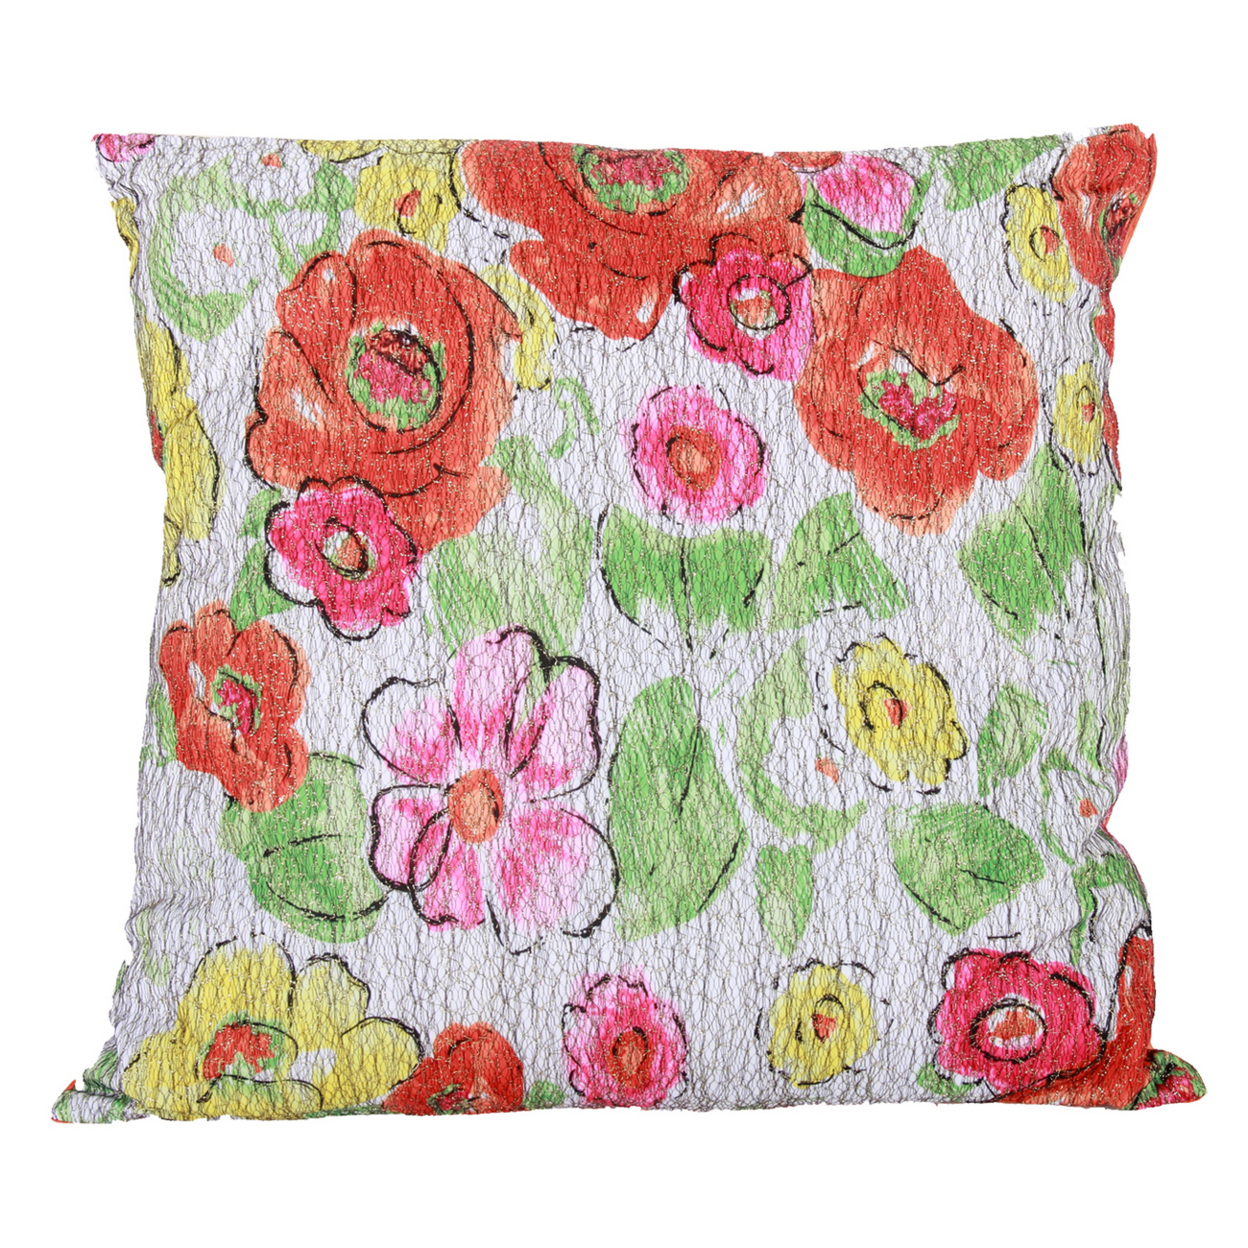 22 X 22 Inch Polyester Pillow With Crackled Floral Imprint, Set Of 2, Multicolor- Saltoro Sherpi